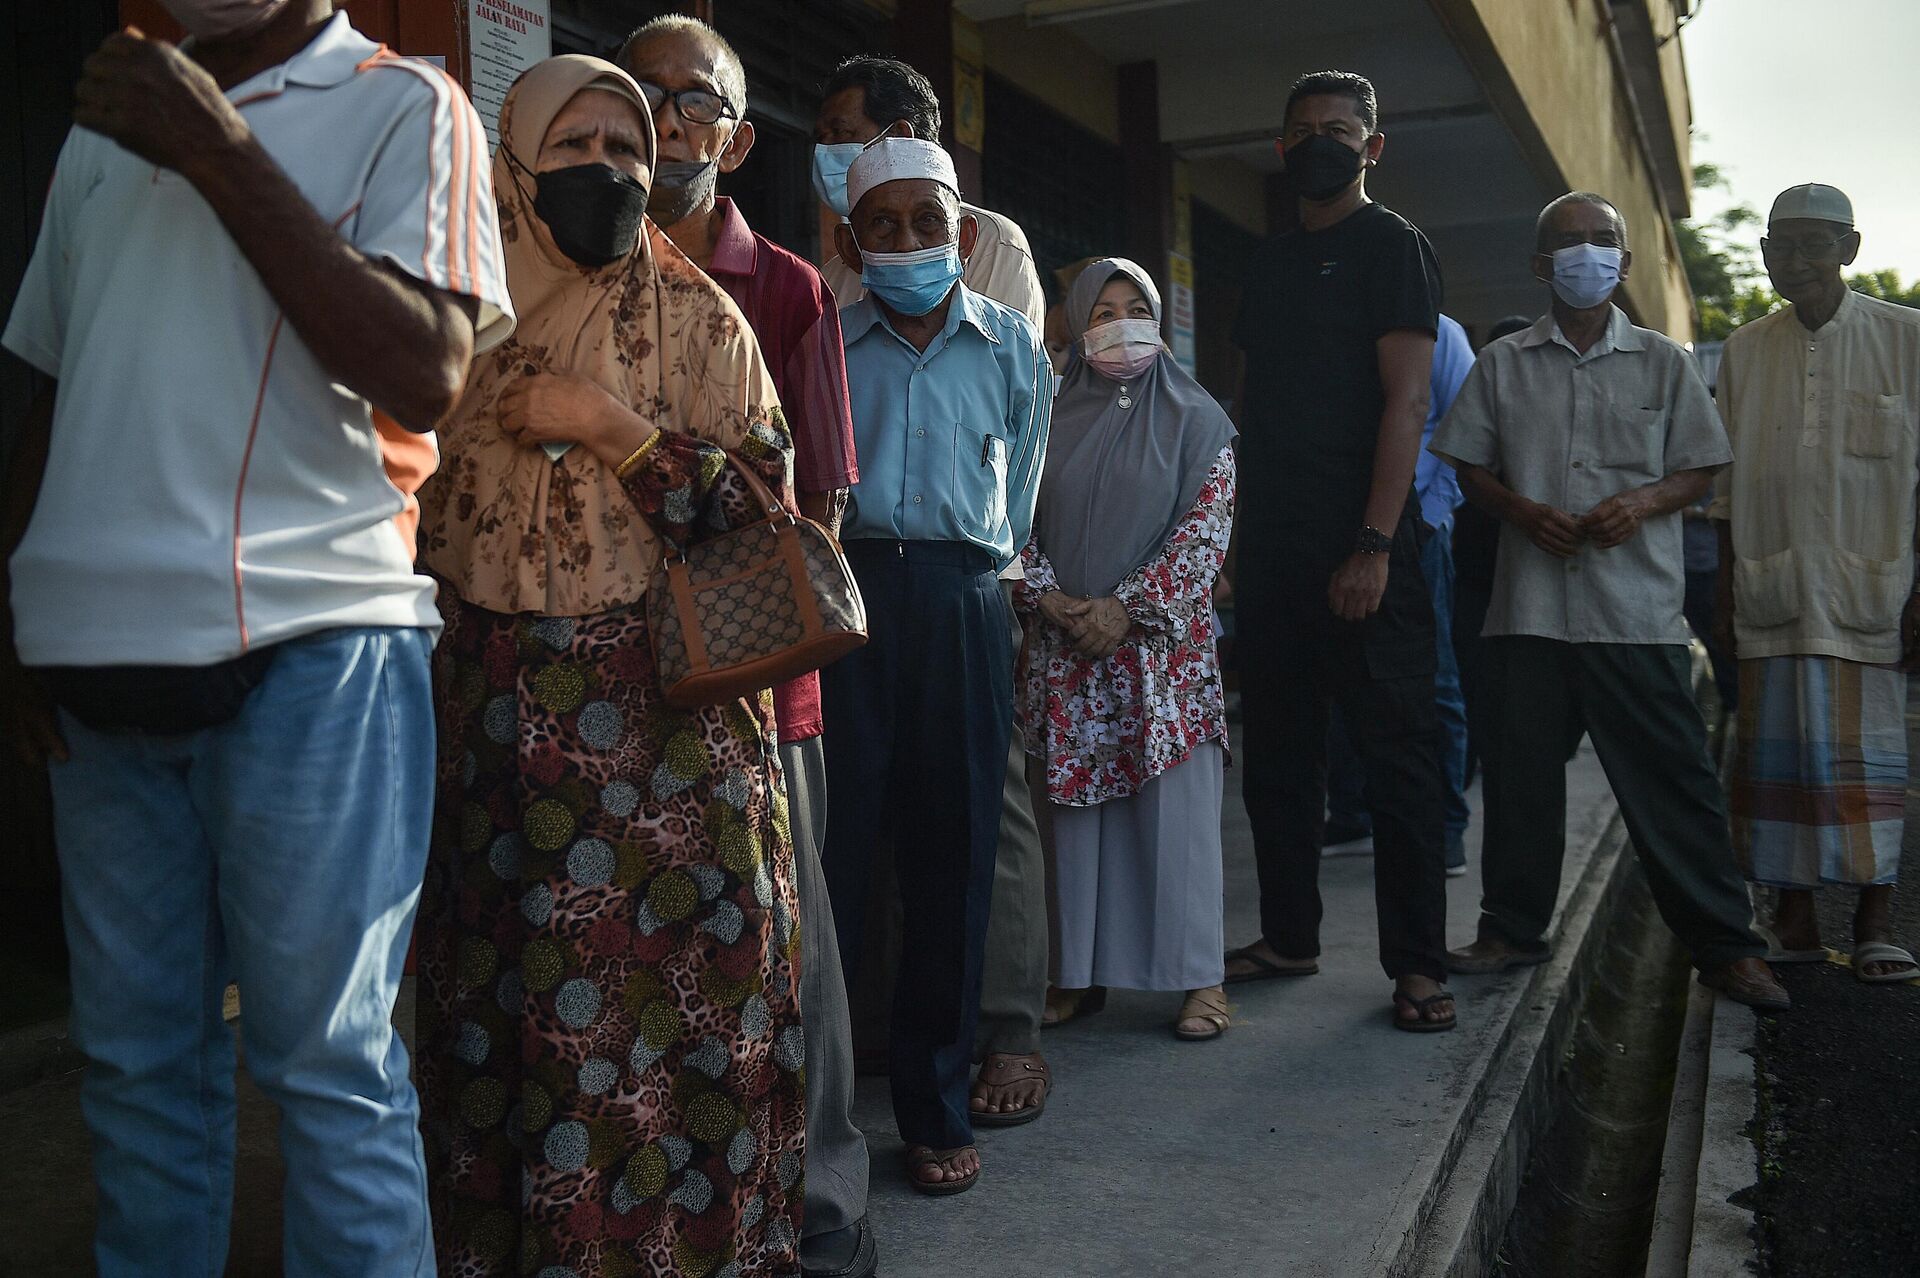 Voters line up at a polling station during the general election in Permatang Pauh, Malaysia's Penang state, on November 19, 2022. - Sputnik International, 1920, 19.11.2022